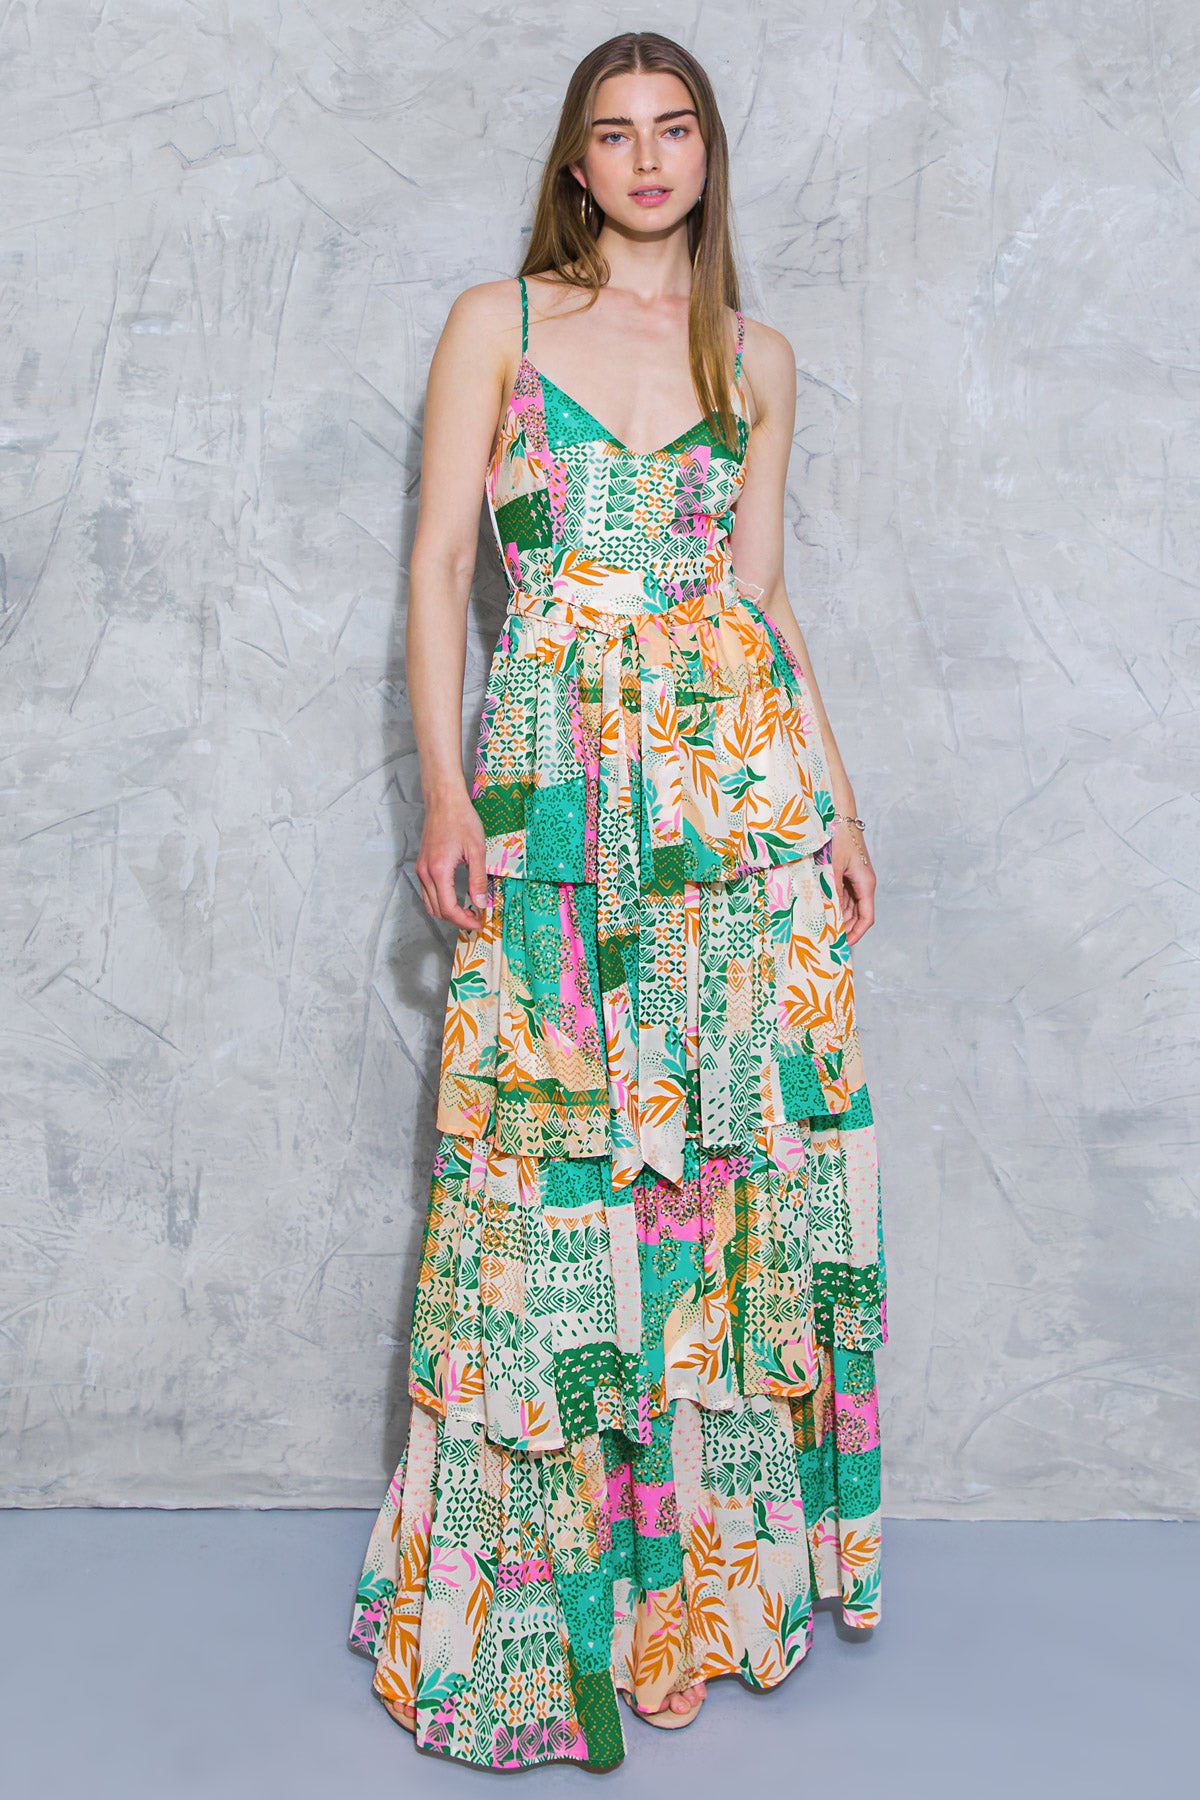 GONE WITH THE BREEZE WOVEN MAXI DRESS